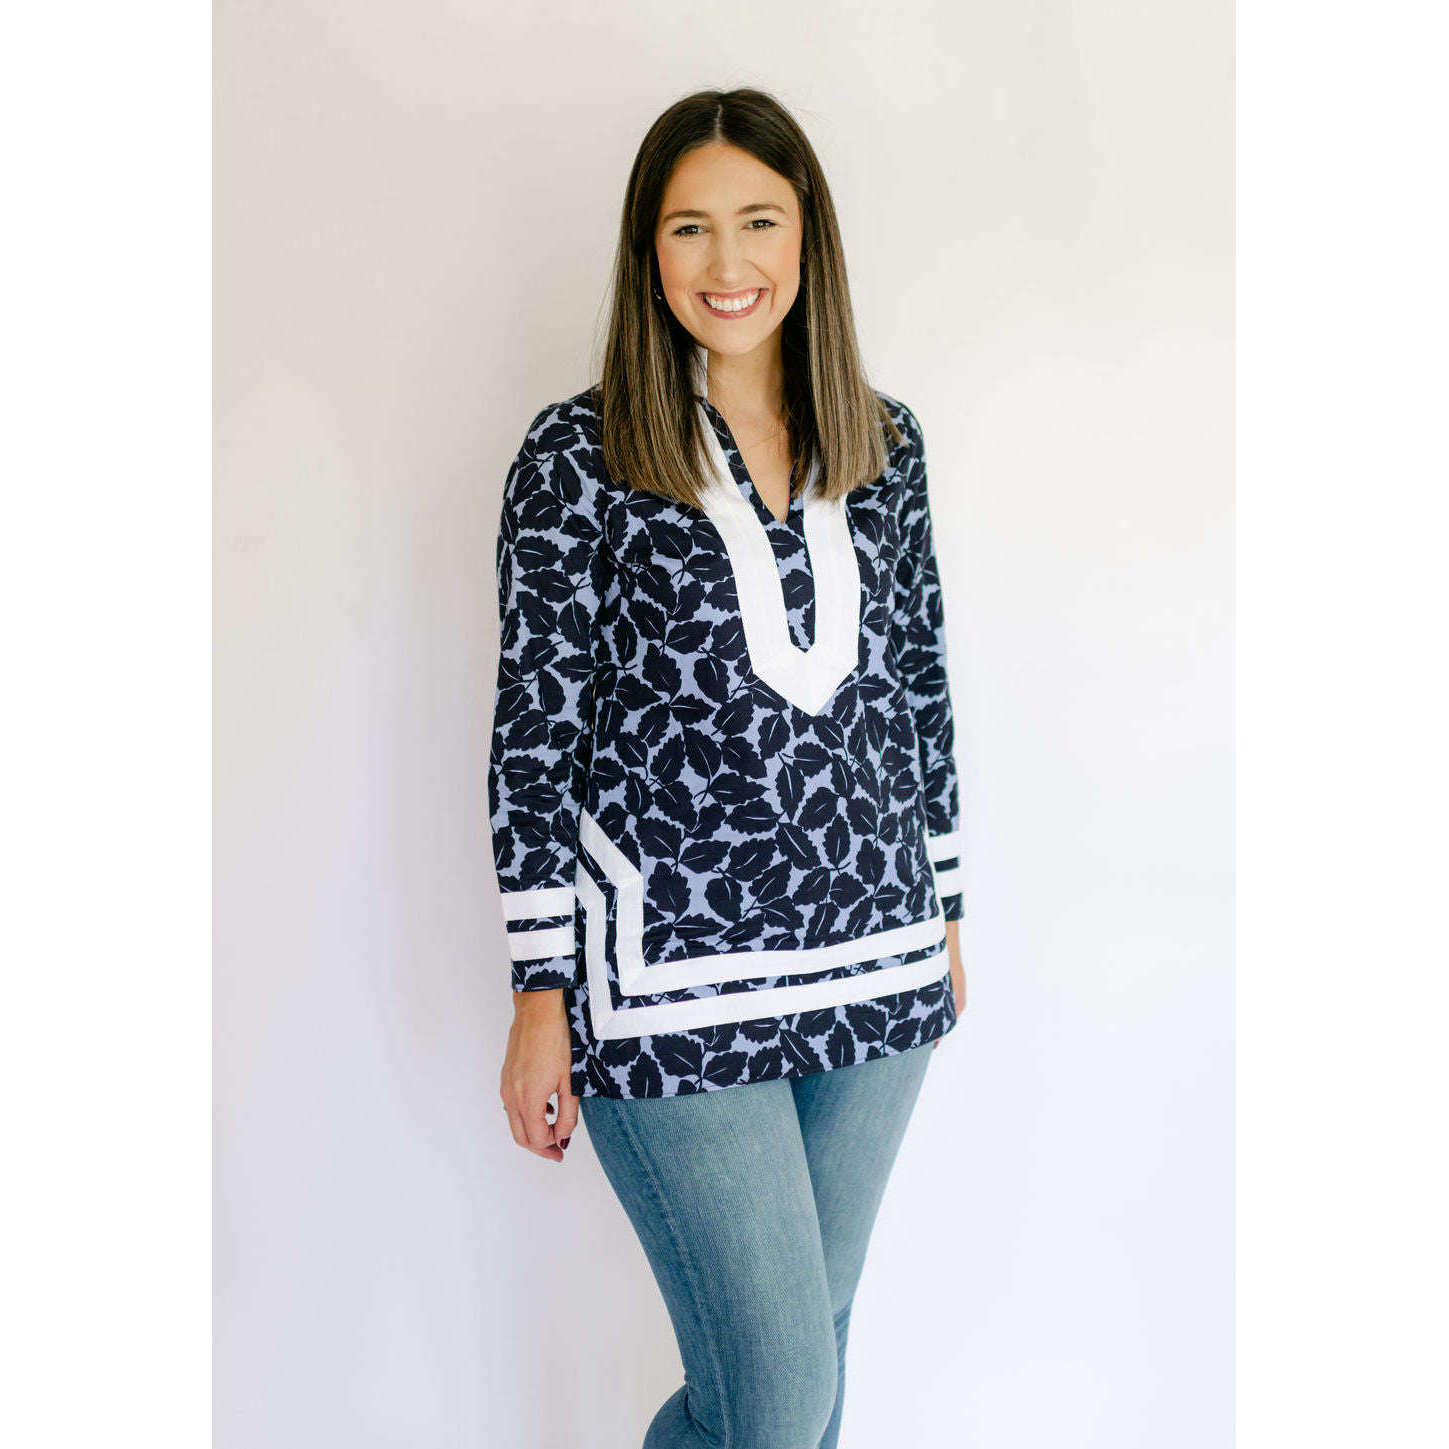 8.28 Boutique:Sail to Sable,Sail to Sable Long Sleeve Classic Tunic in Navy Hydrangea,Tops